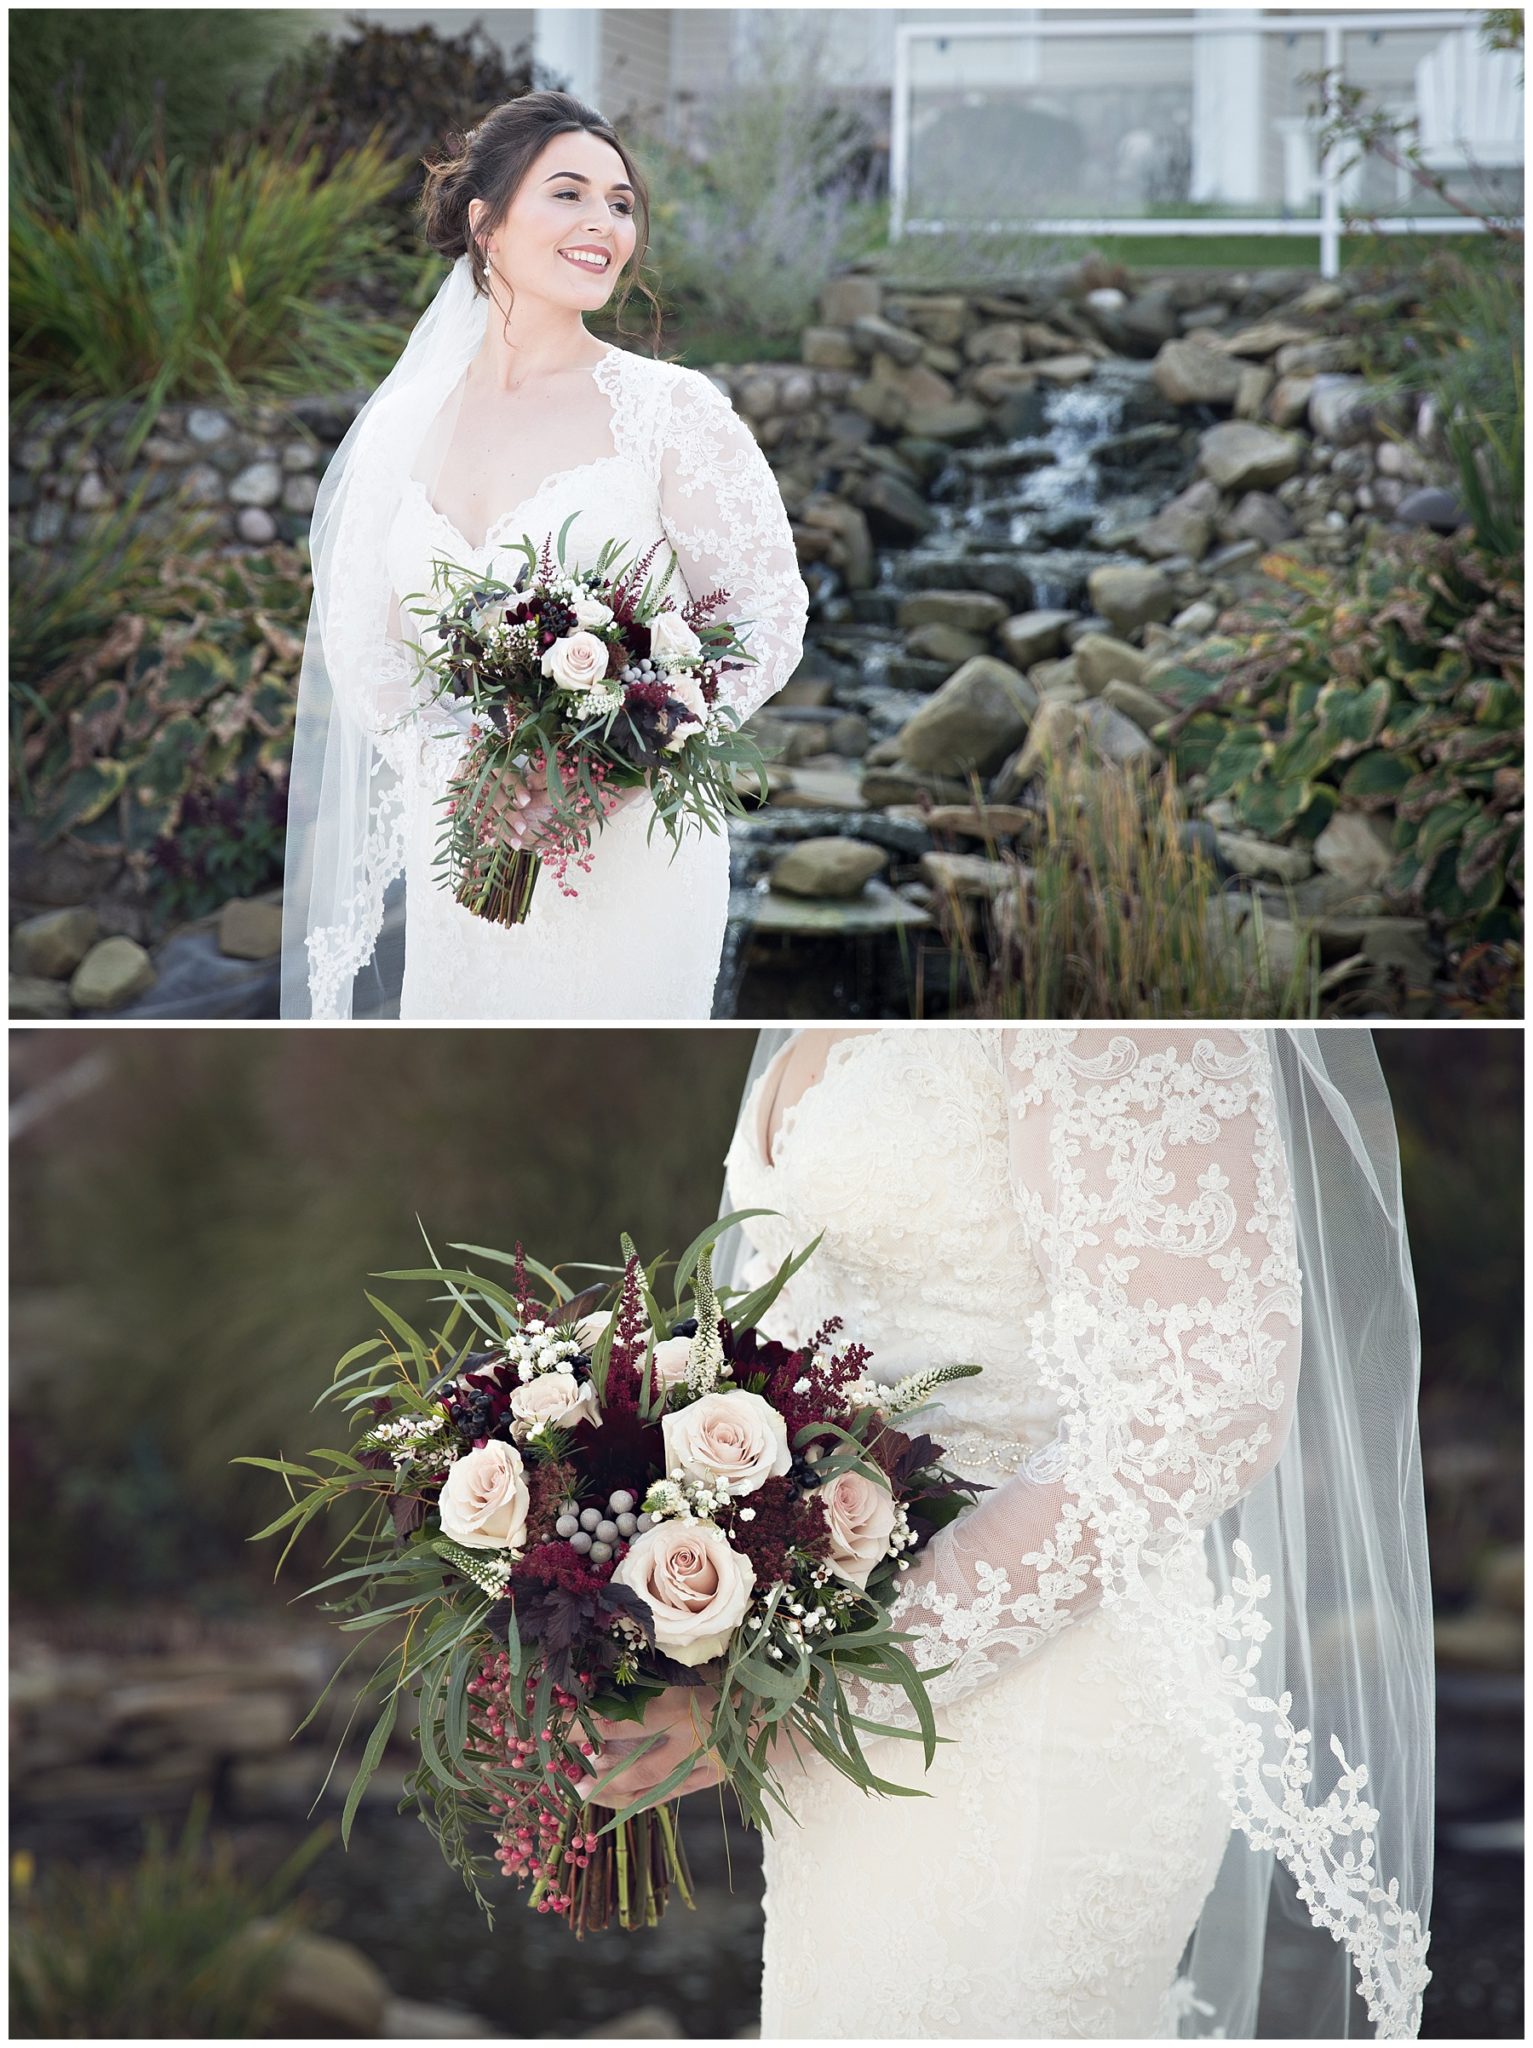 Bridal in stunning lace bridal gown with cream and Burgundy bouquet at Bay Pointe Inn on Gun Lake photographed by Melissa Gregersen Photography